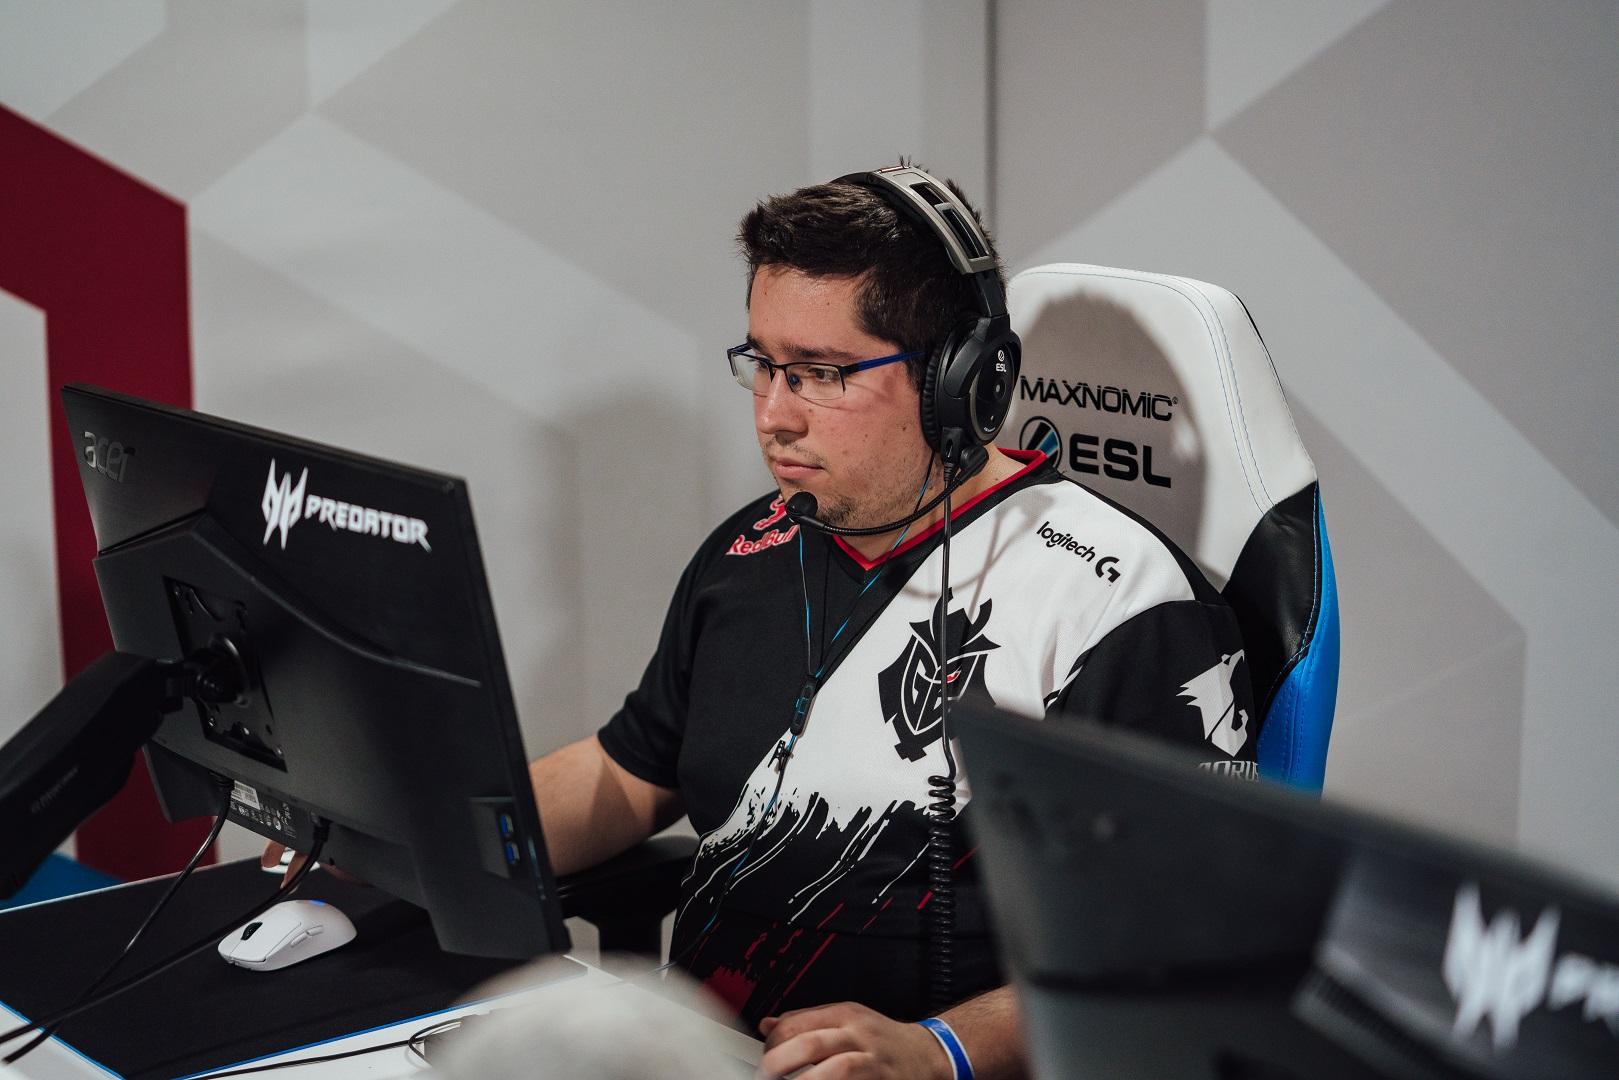 Sirboss playing for G2 Esports at Six Invitational 2020